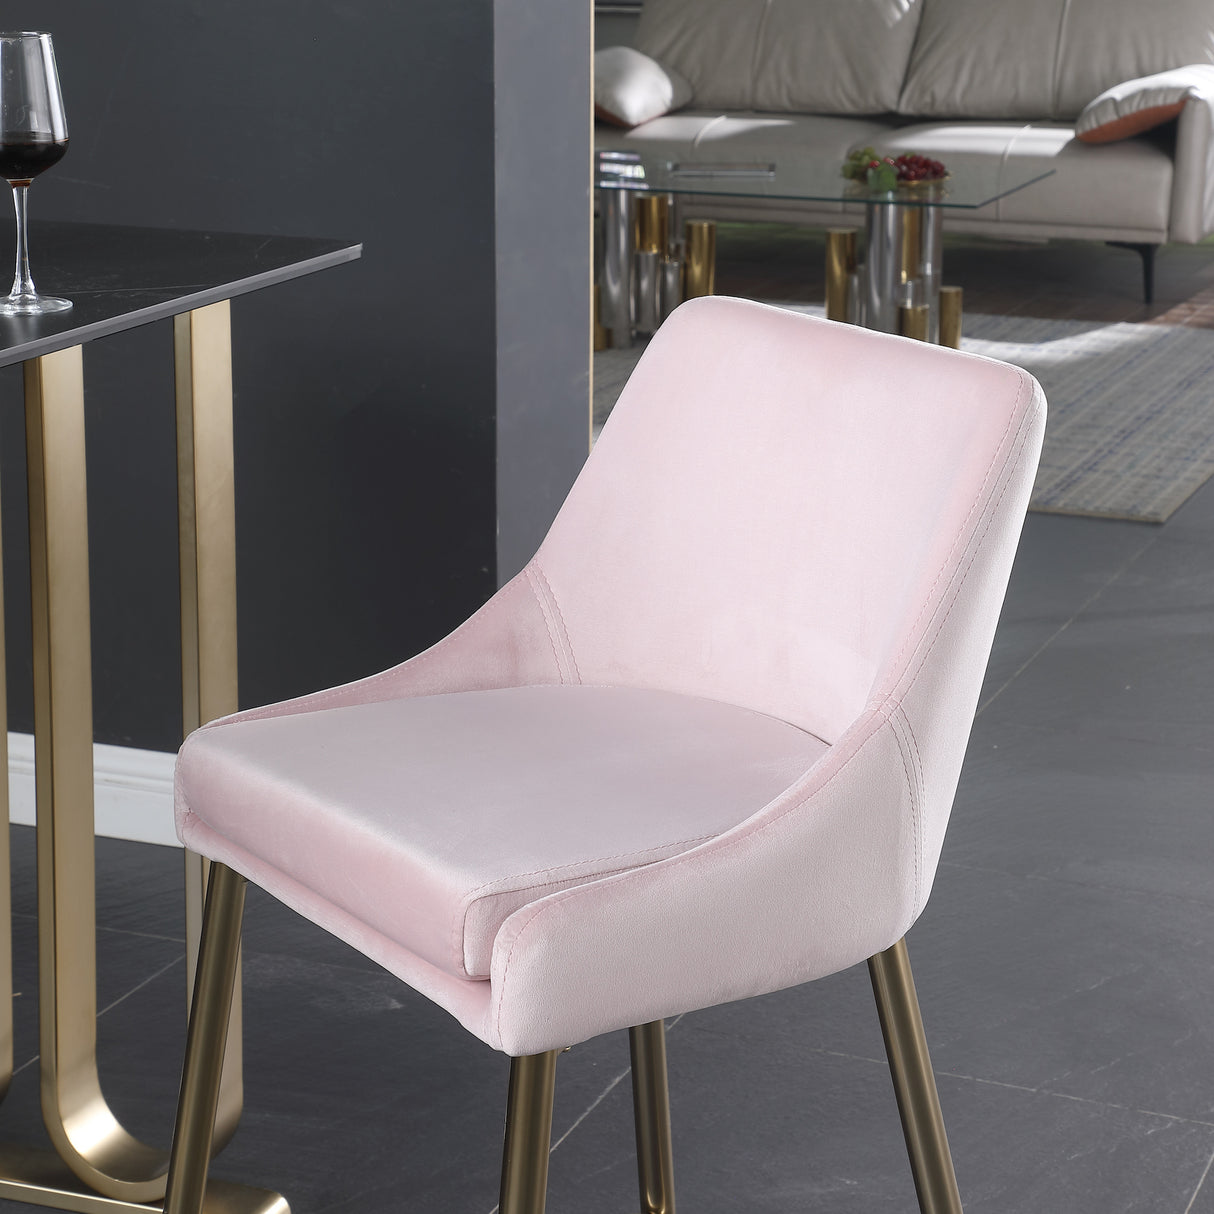 Woker Furniture Contemporary Velvet Upholstered Counter Stool with Brushed Gold Metal Legs and Foot Rest, Set of 2, Light Pink - Home Elegance USA